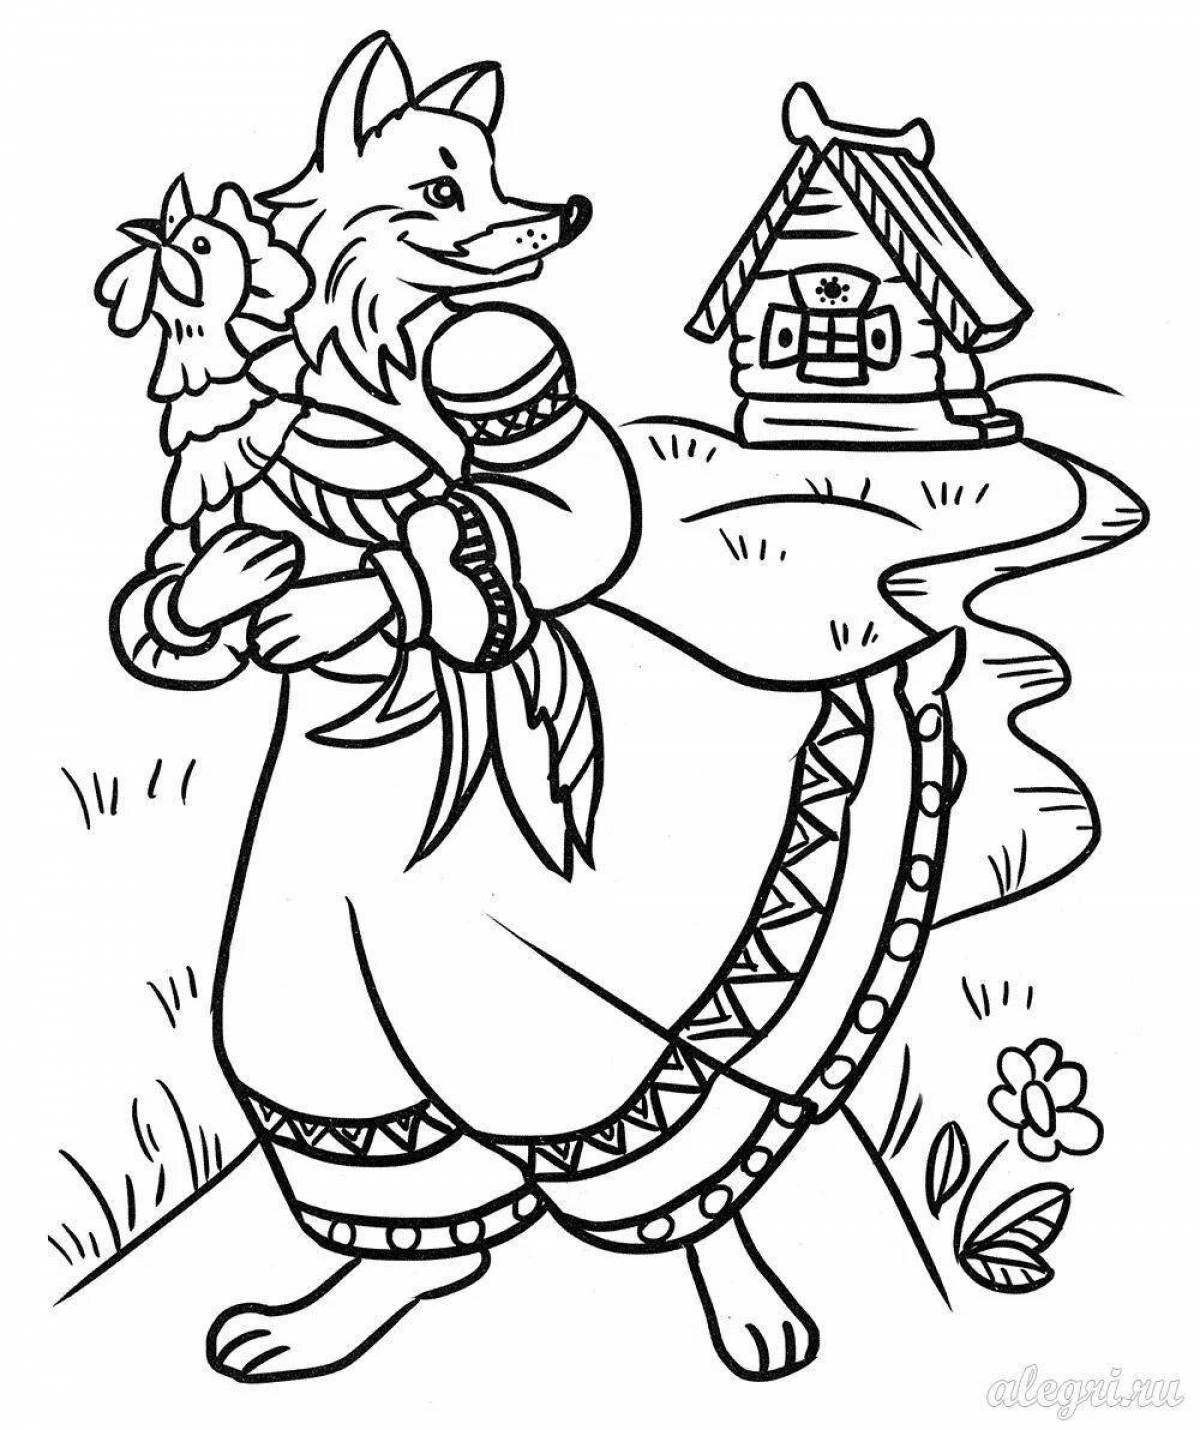 Coloring page graceful fox